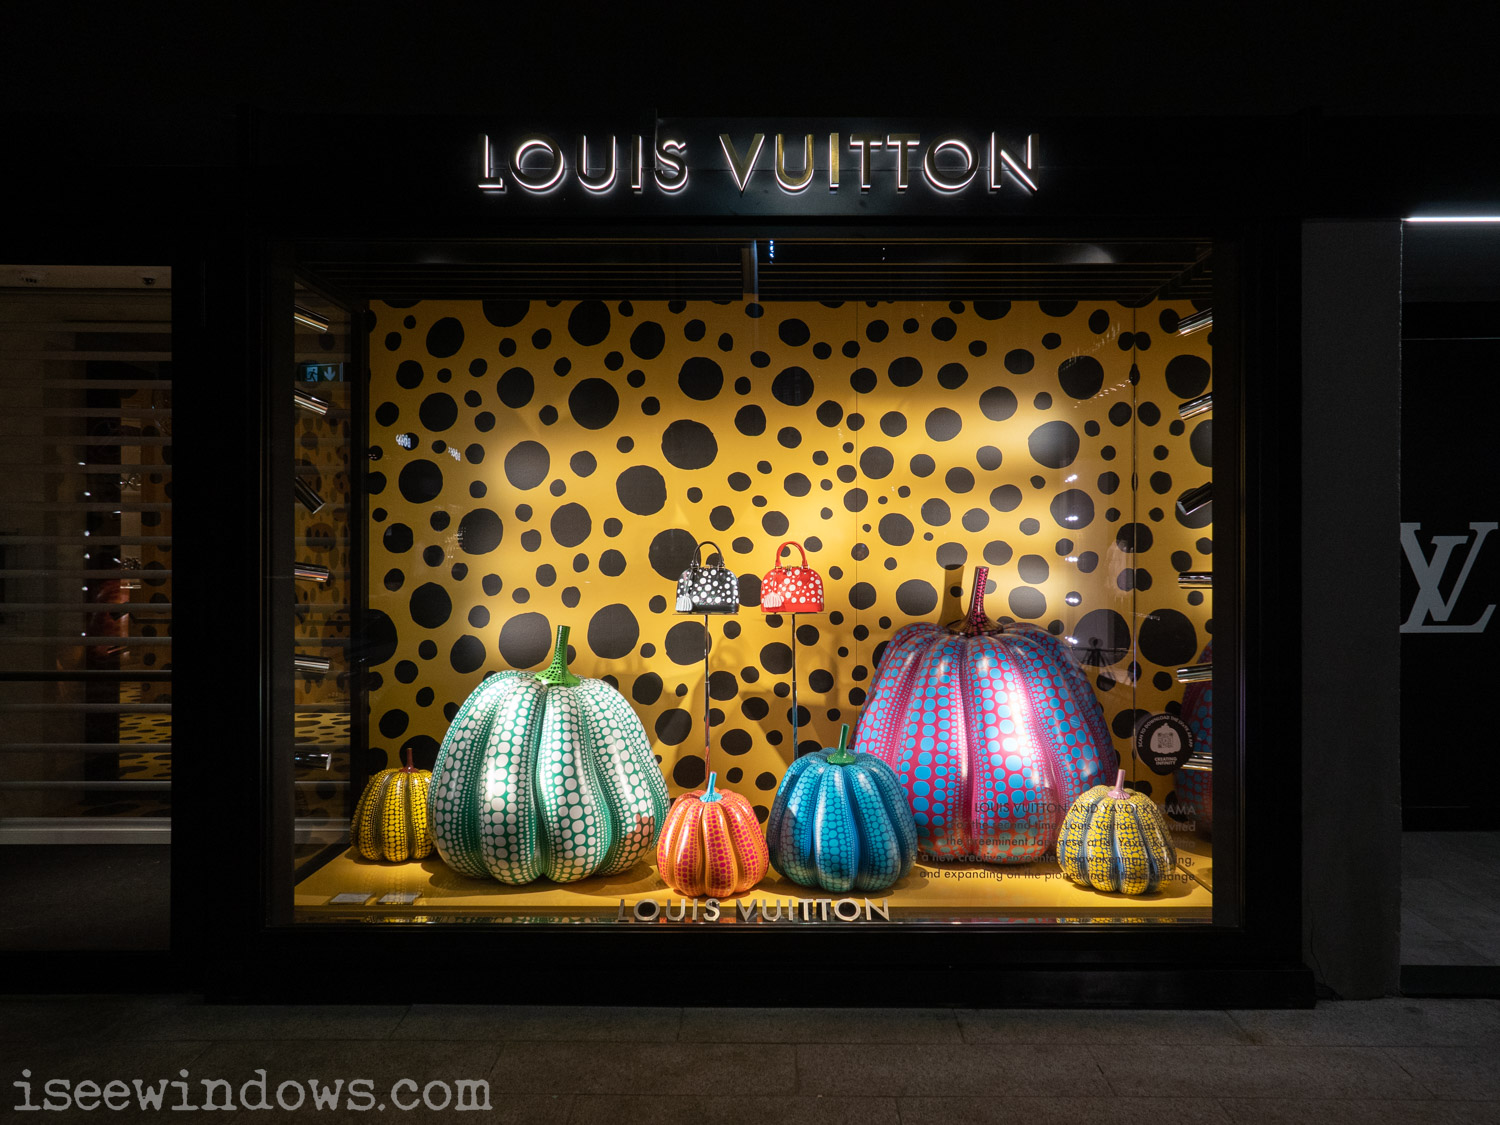 How much for my Vuitton in the shop window?